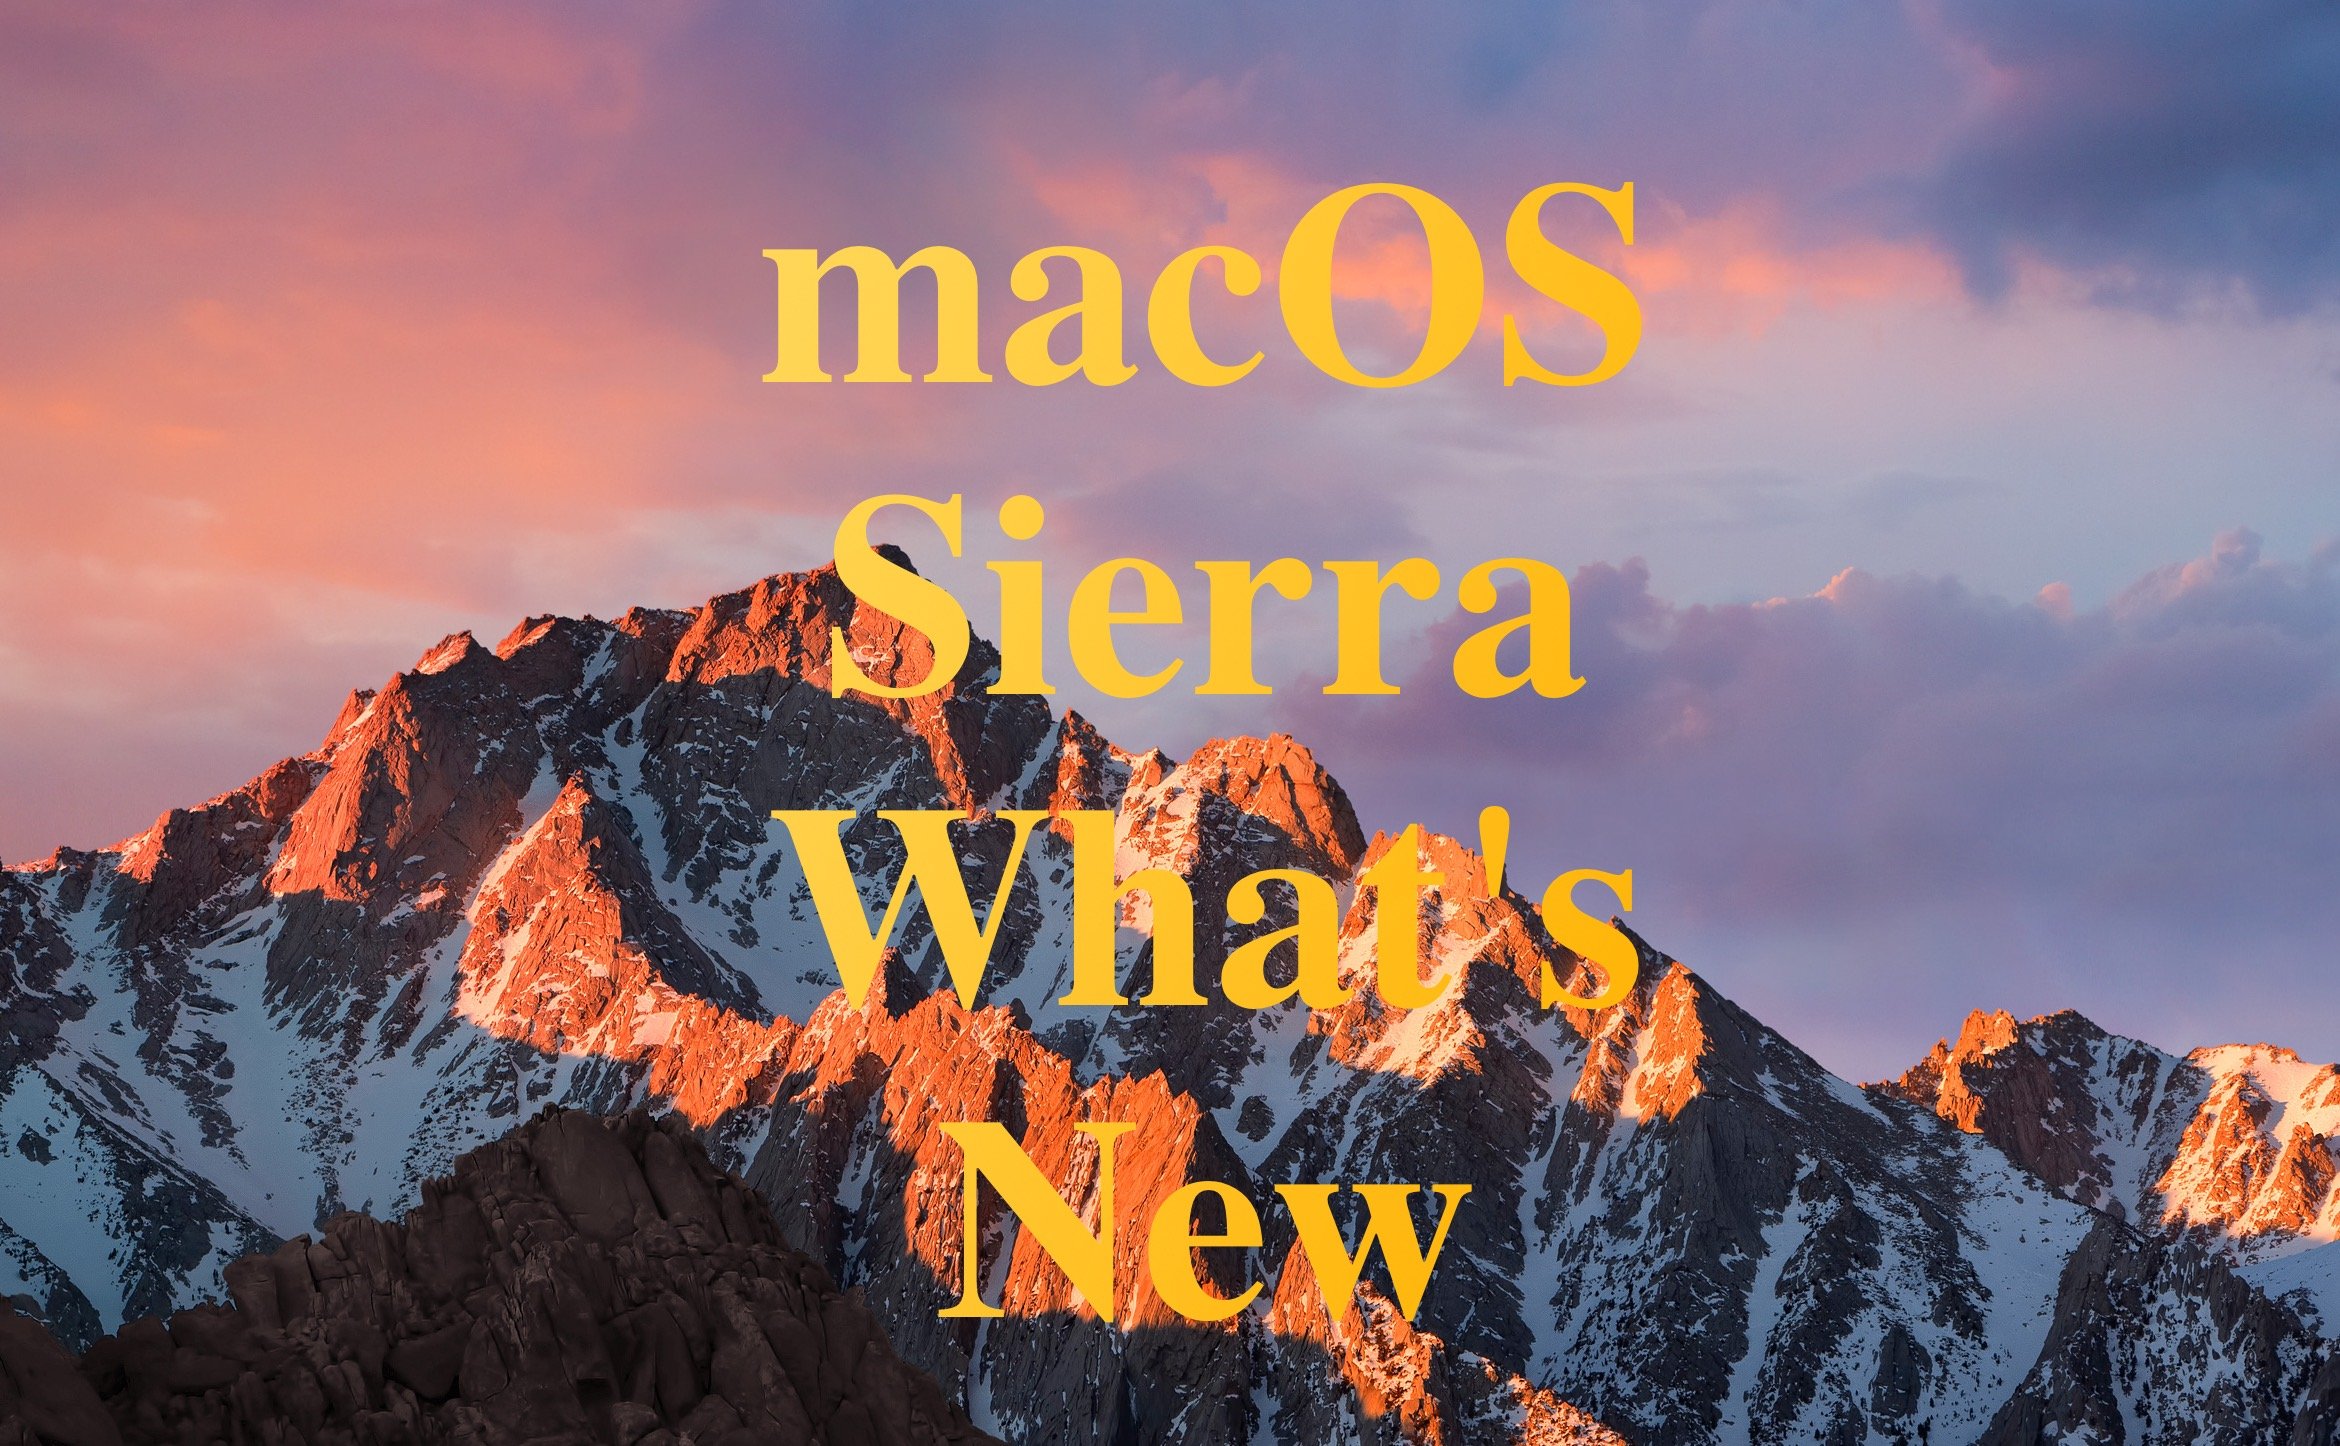 12 New macOS Sierra Features Worth Upgrading For